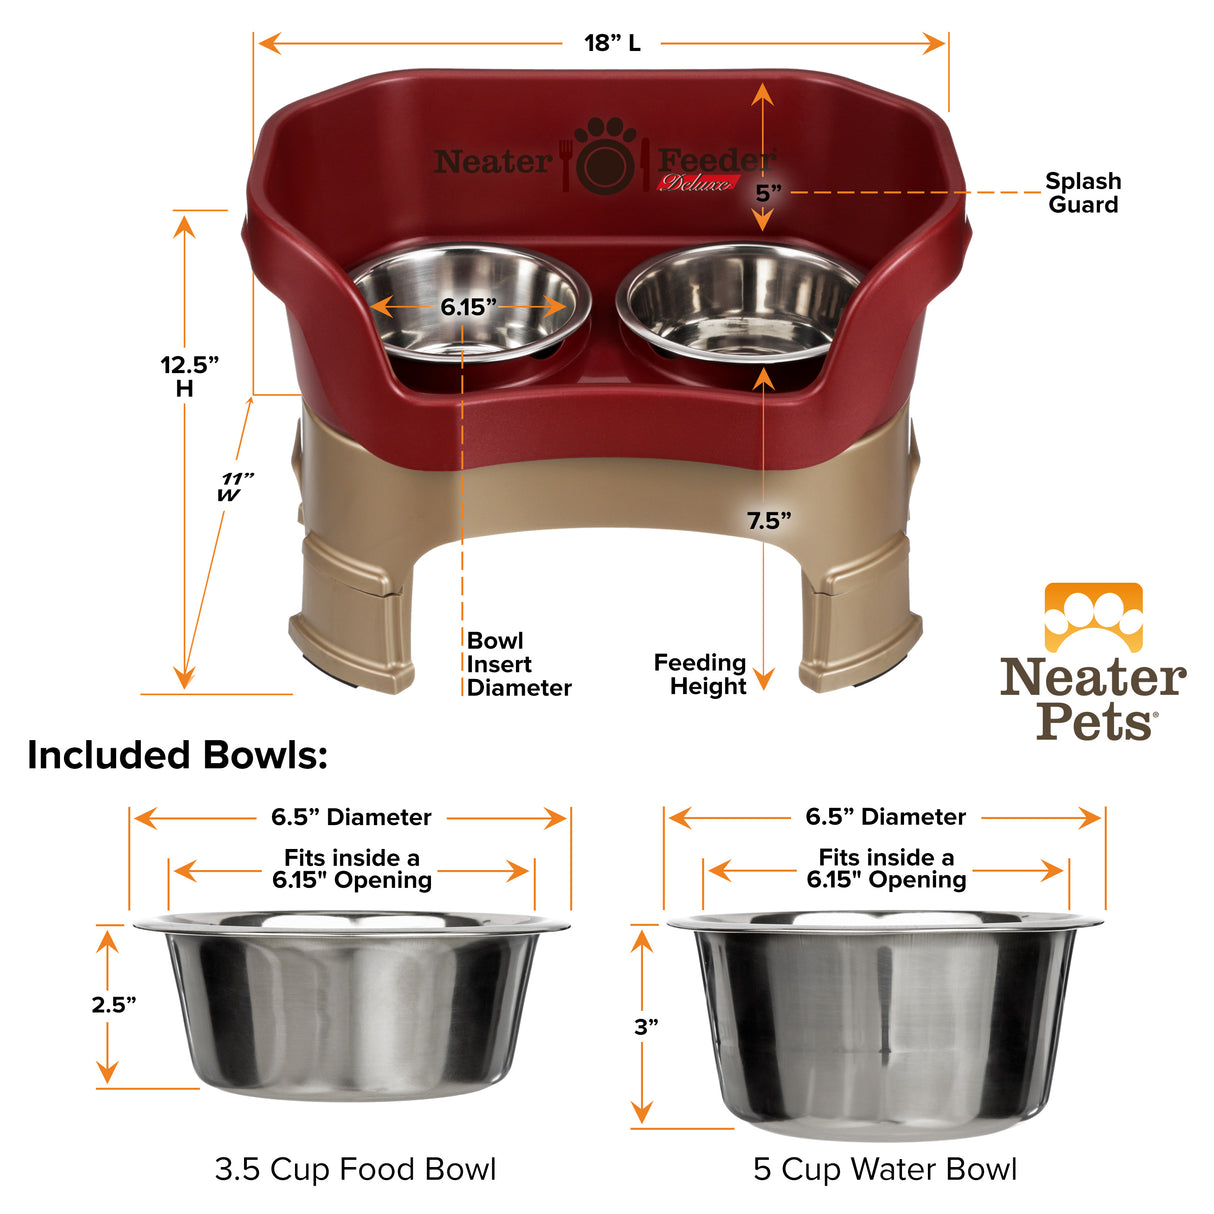 Deluxe Cranberry Medium Dog Neater Feeder with leg extensions and Bowl dimensions